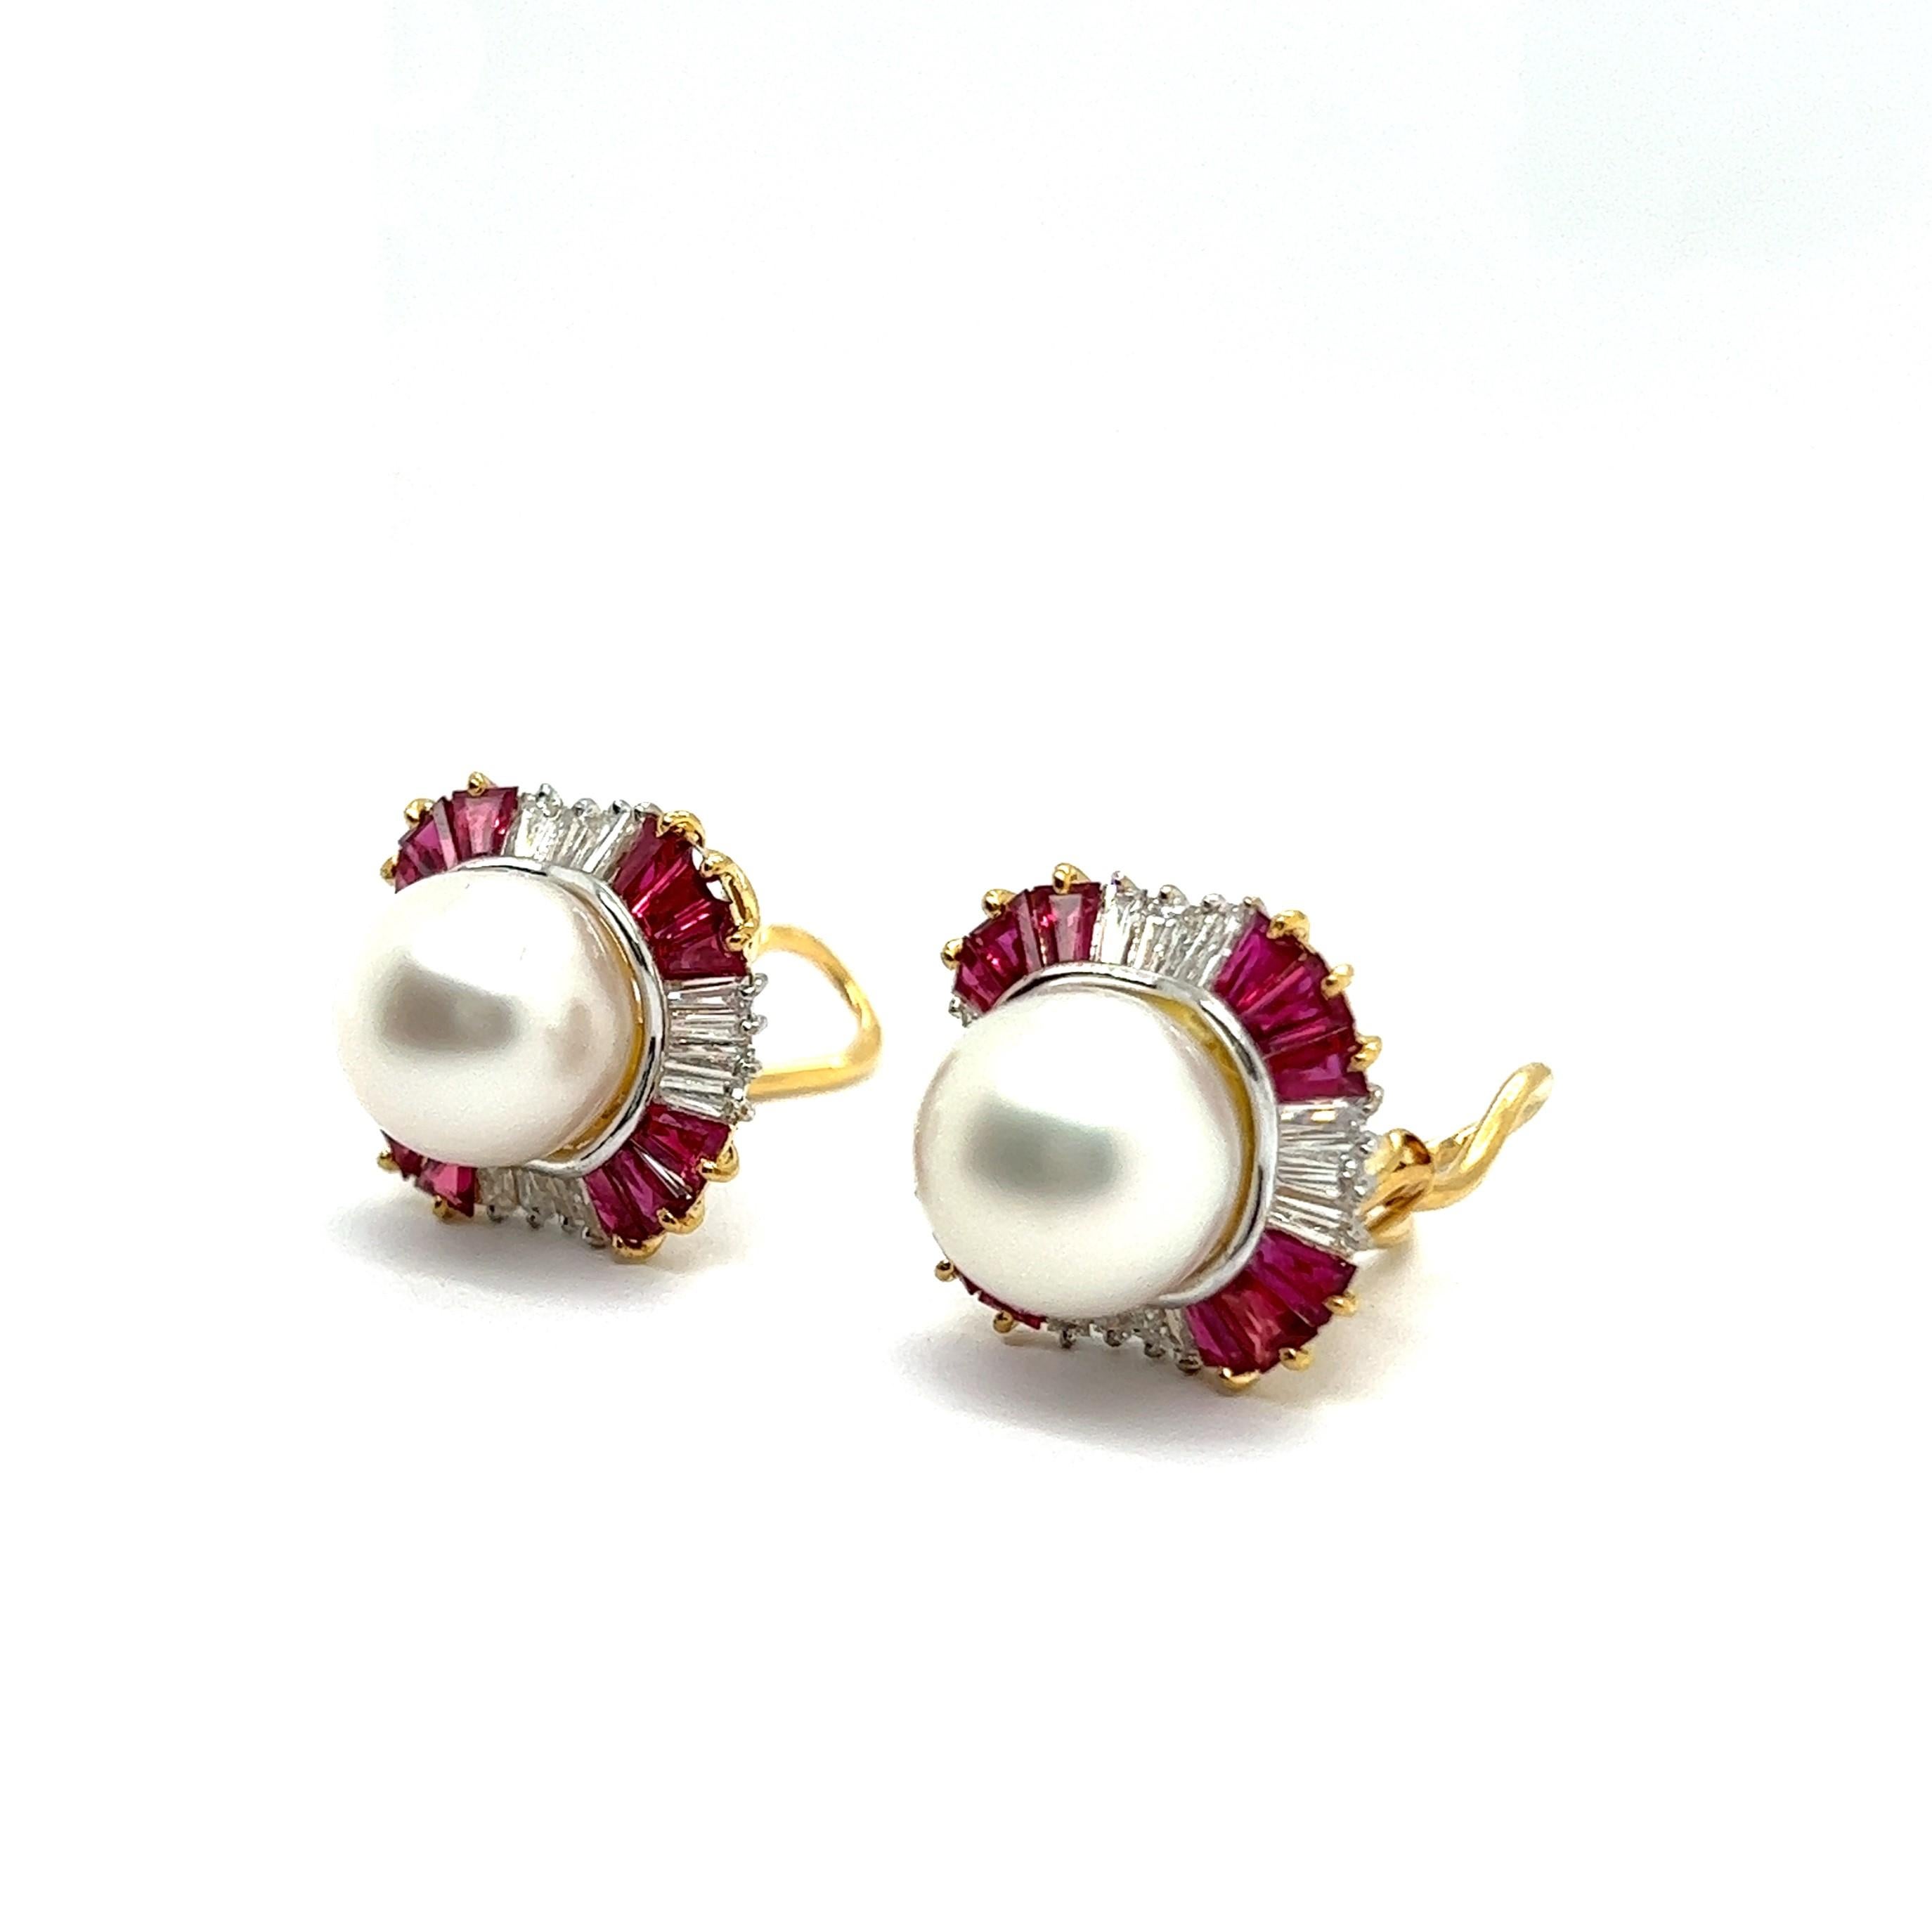 Clip-on Earrings with Pearls, Rubies & Diamonds in 18 Karat Yellow & White Gold In Good Condition For Sale In Lucerne, CH